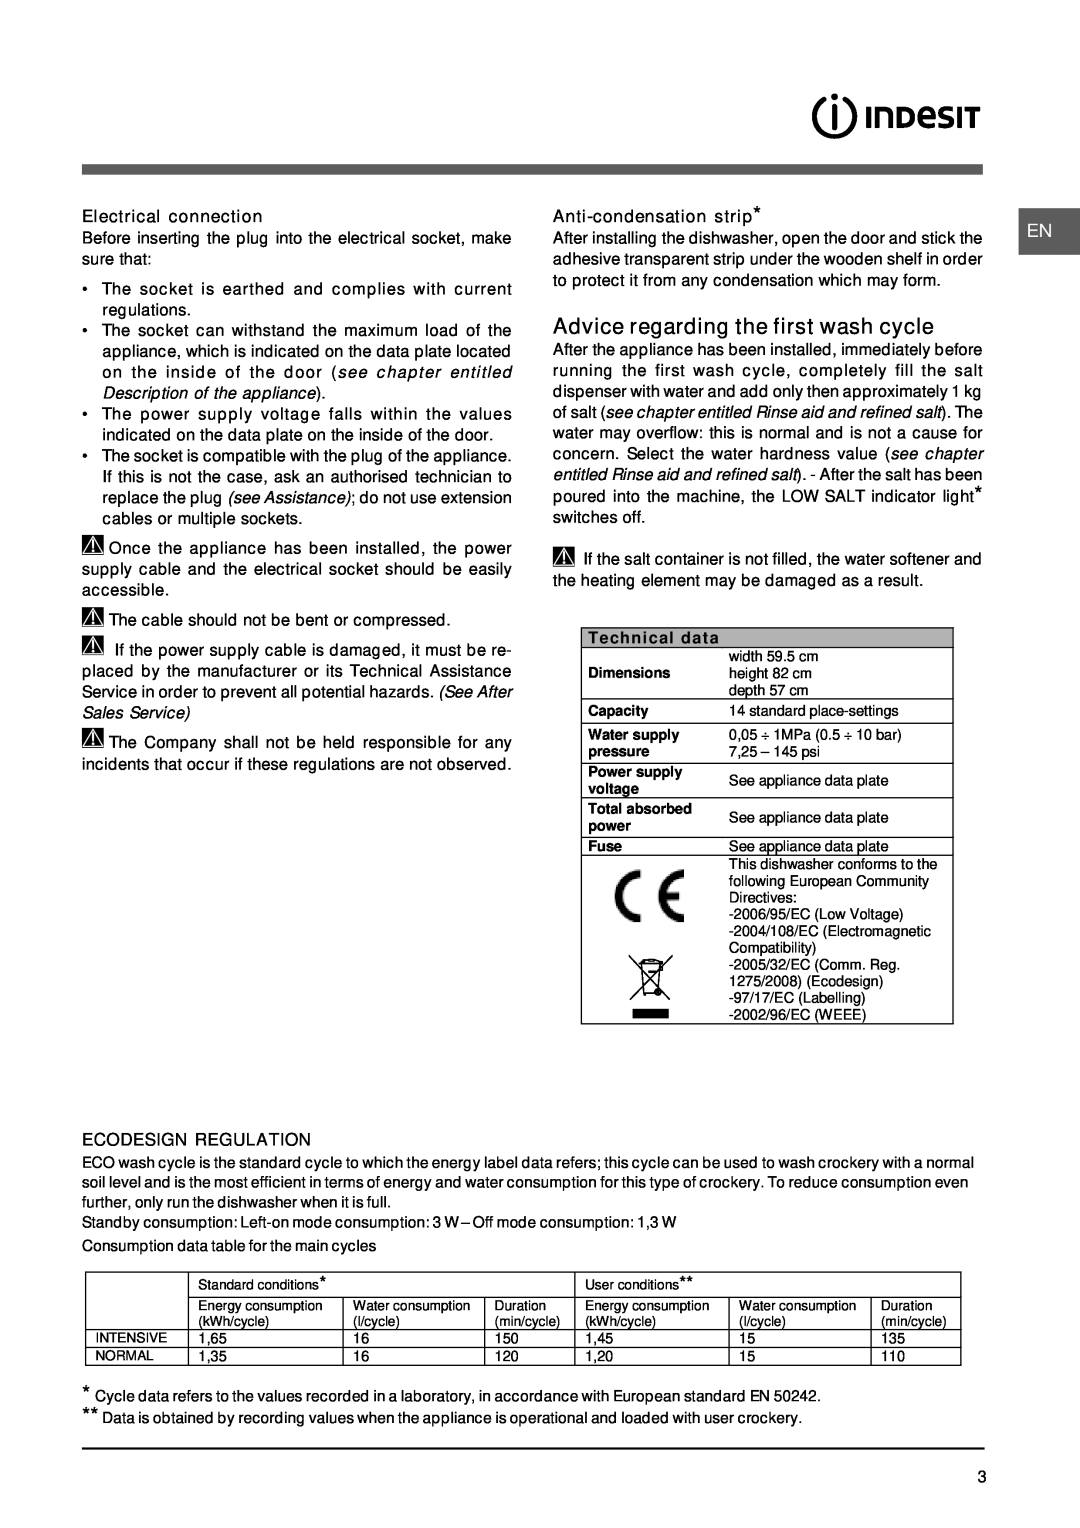 Indesit DIF 1614 Advice regarding the first wash cycle, Electrical connection, Anti-condensationstrip, Technical data 